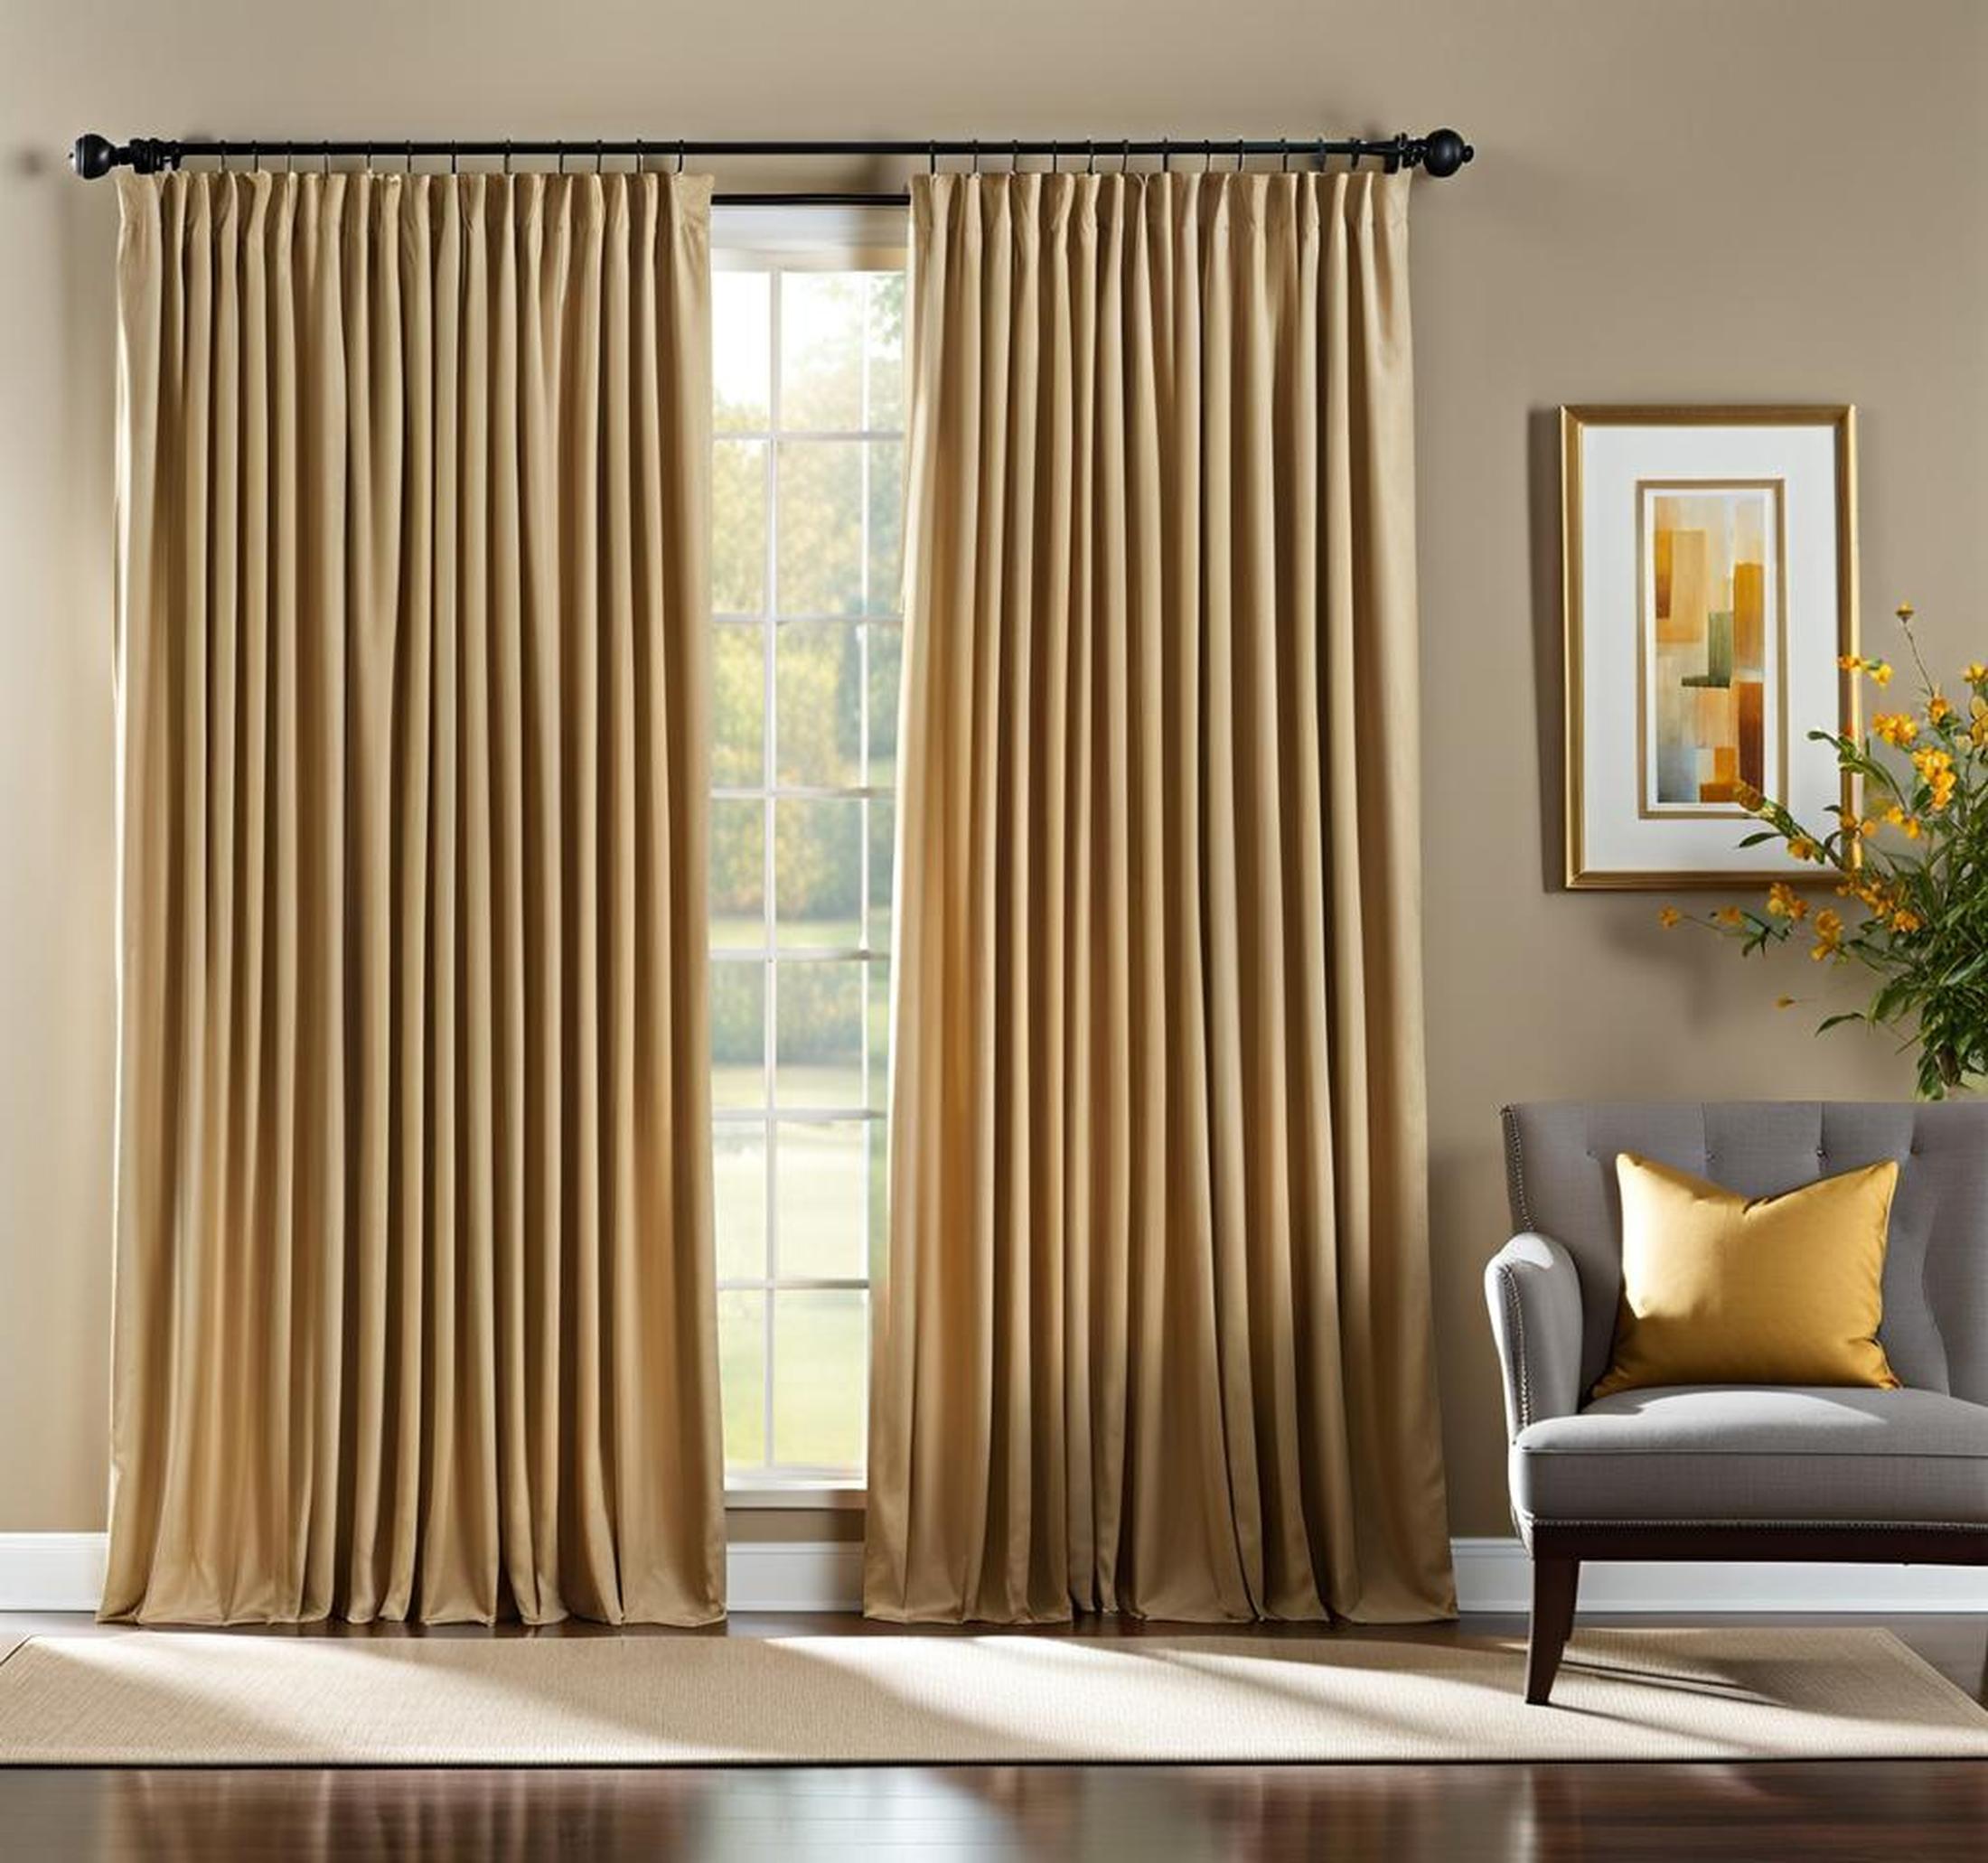 how wide should curtains be for 72 inch window